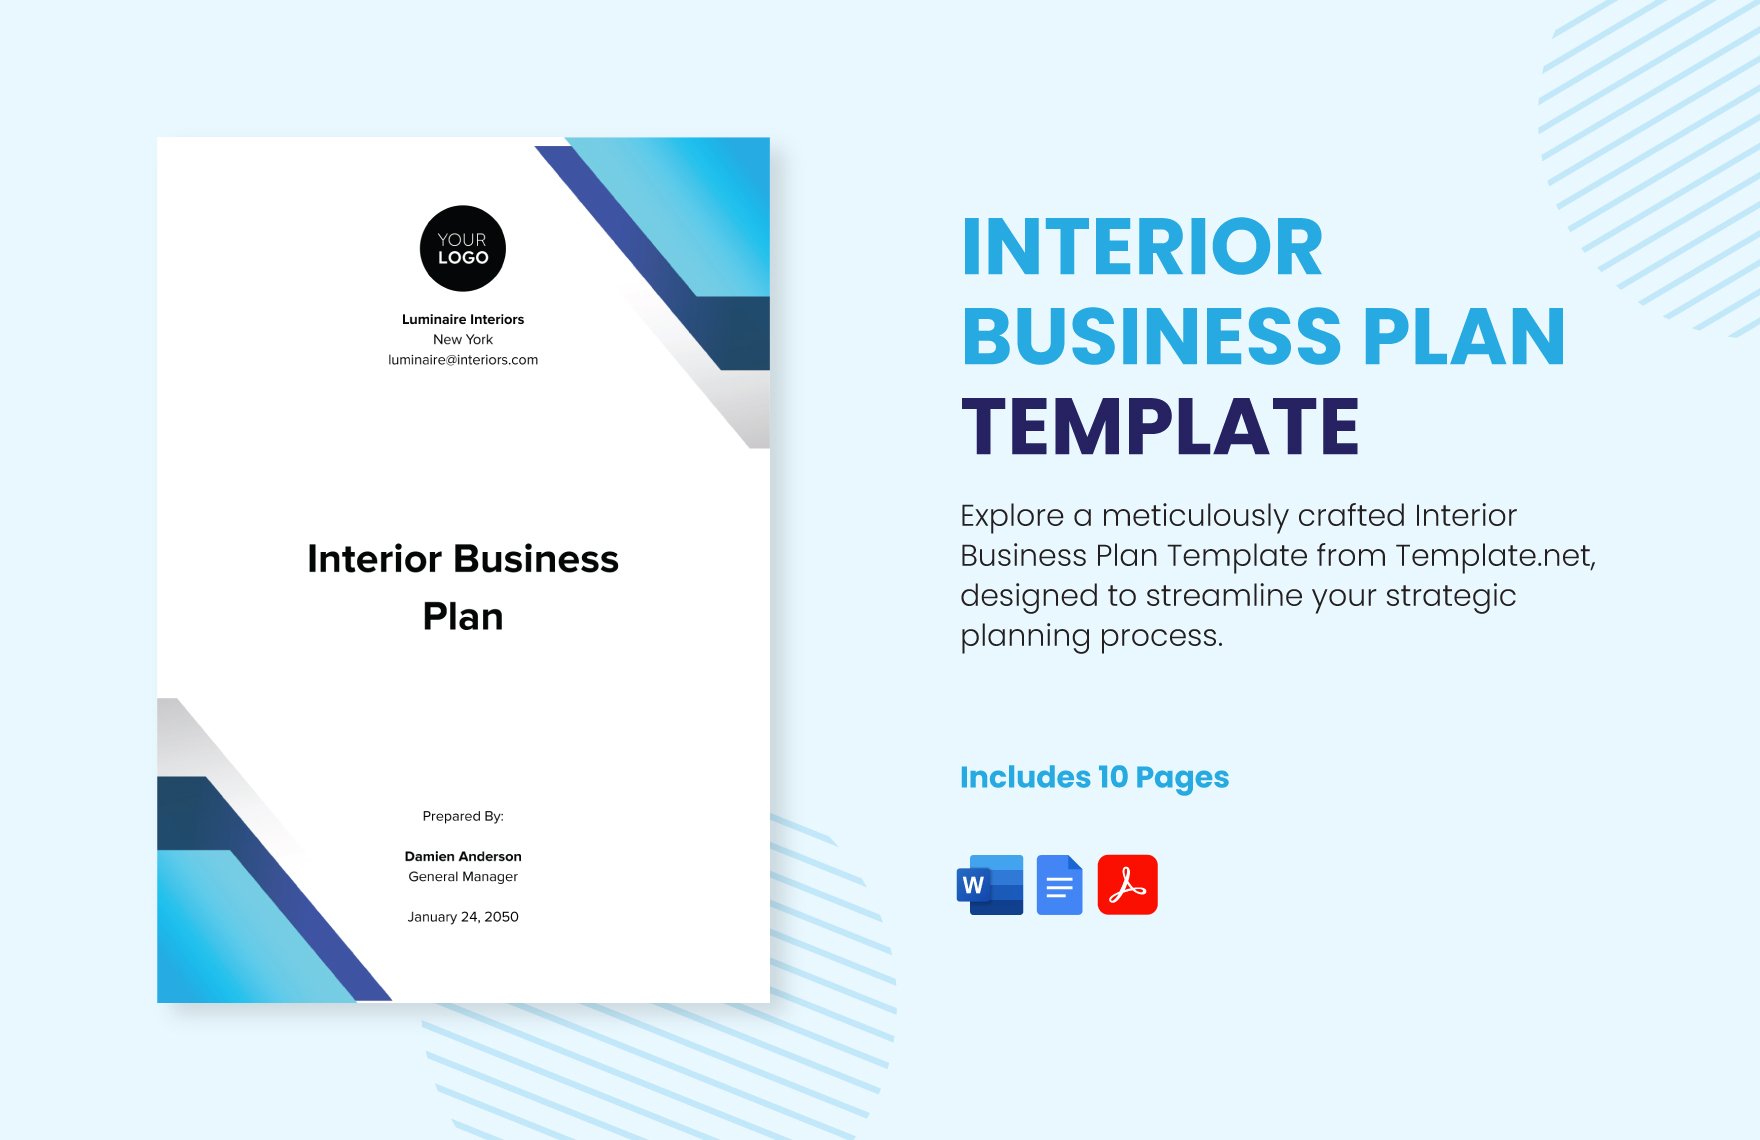 Interior Business Plan Template in Word, Google Docs, PDF